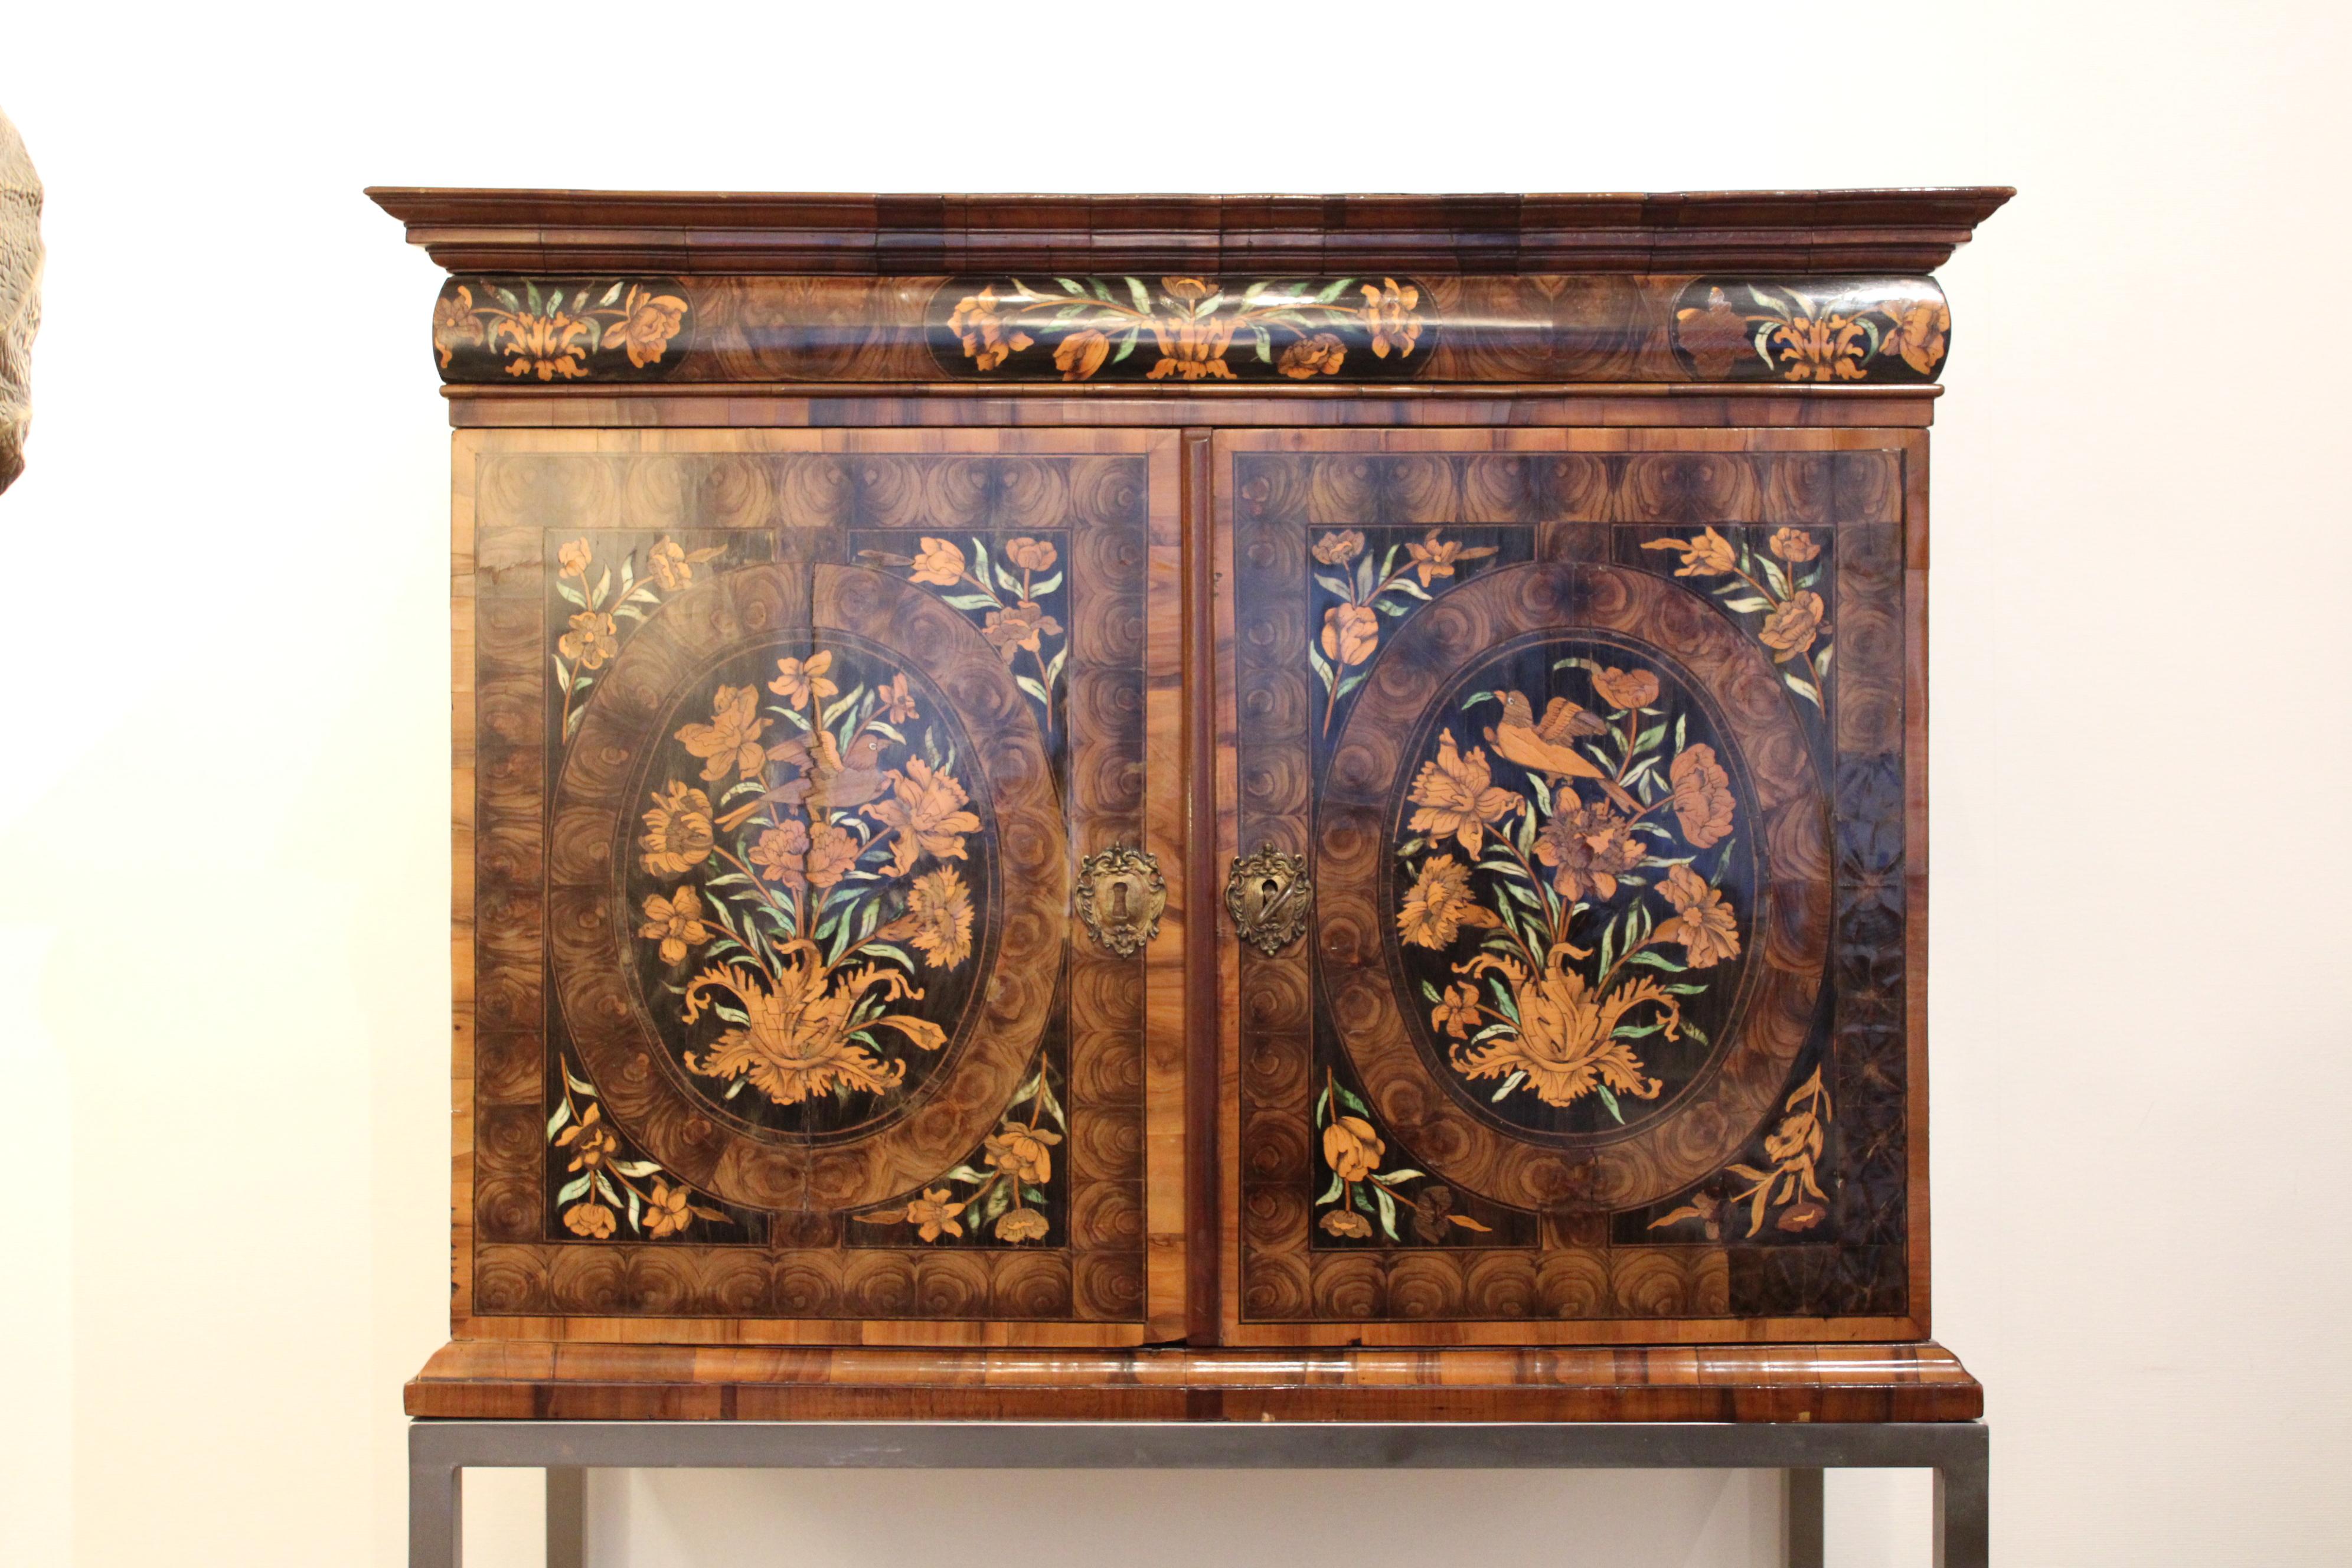 Marquetry cabinet, late 18th century 
French work
Base from the 70's